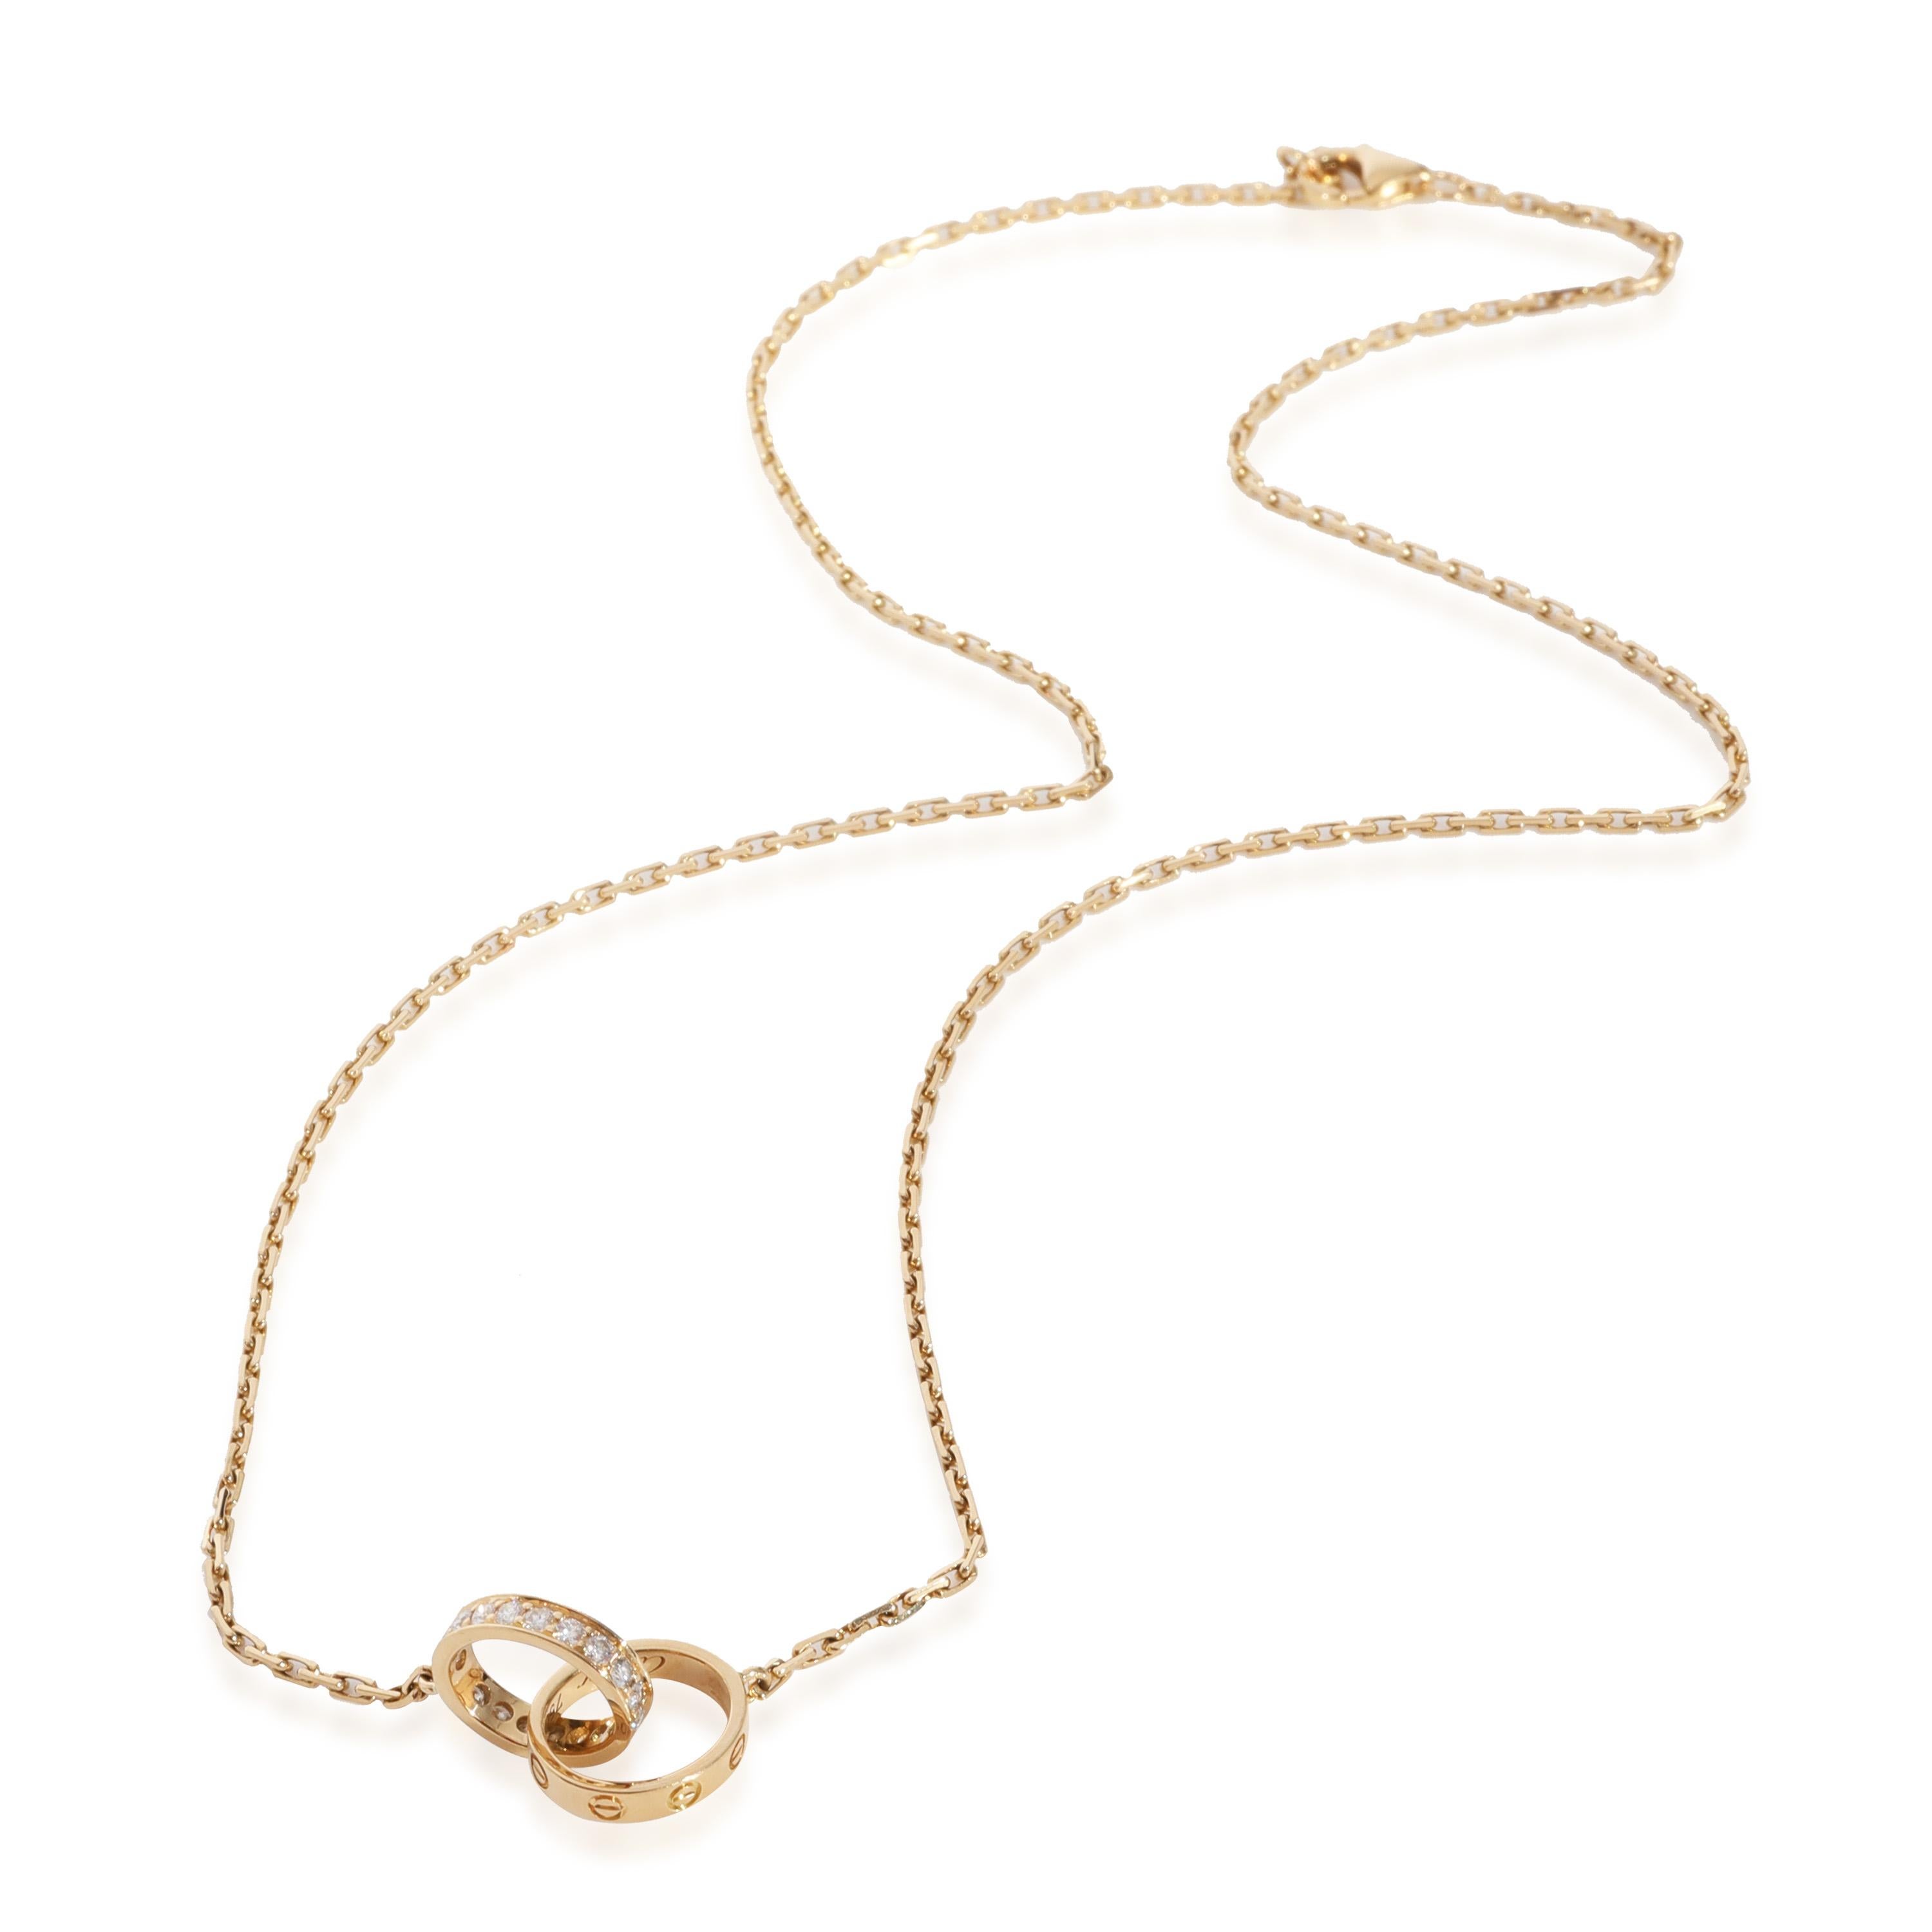 Cartier LOVE Diamond Necklace in 18K Yellow Gold 0.22 CTW
 
 PRIMARY DETAILS
 SKU: 128961
 Listing Title: Cartier LOVE Diamond Necklace in 18K Yellow Gold 0.22 CTW
 Condition Description: Cartier's Love collection is the epitome of iconic, from the